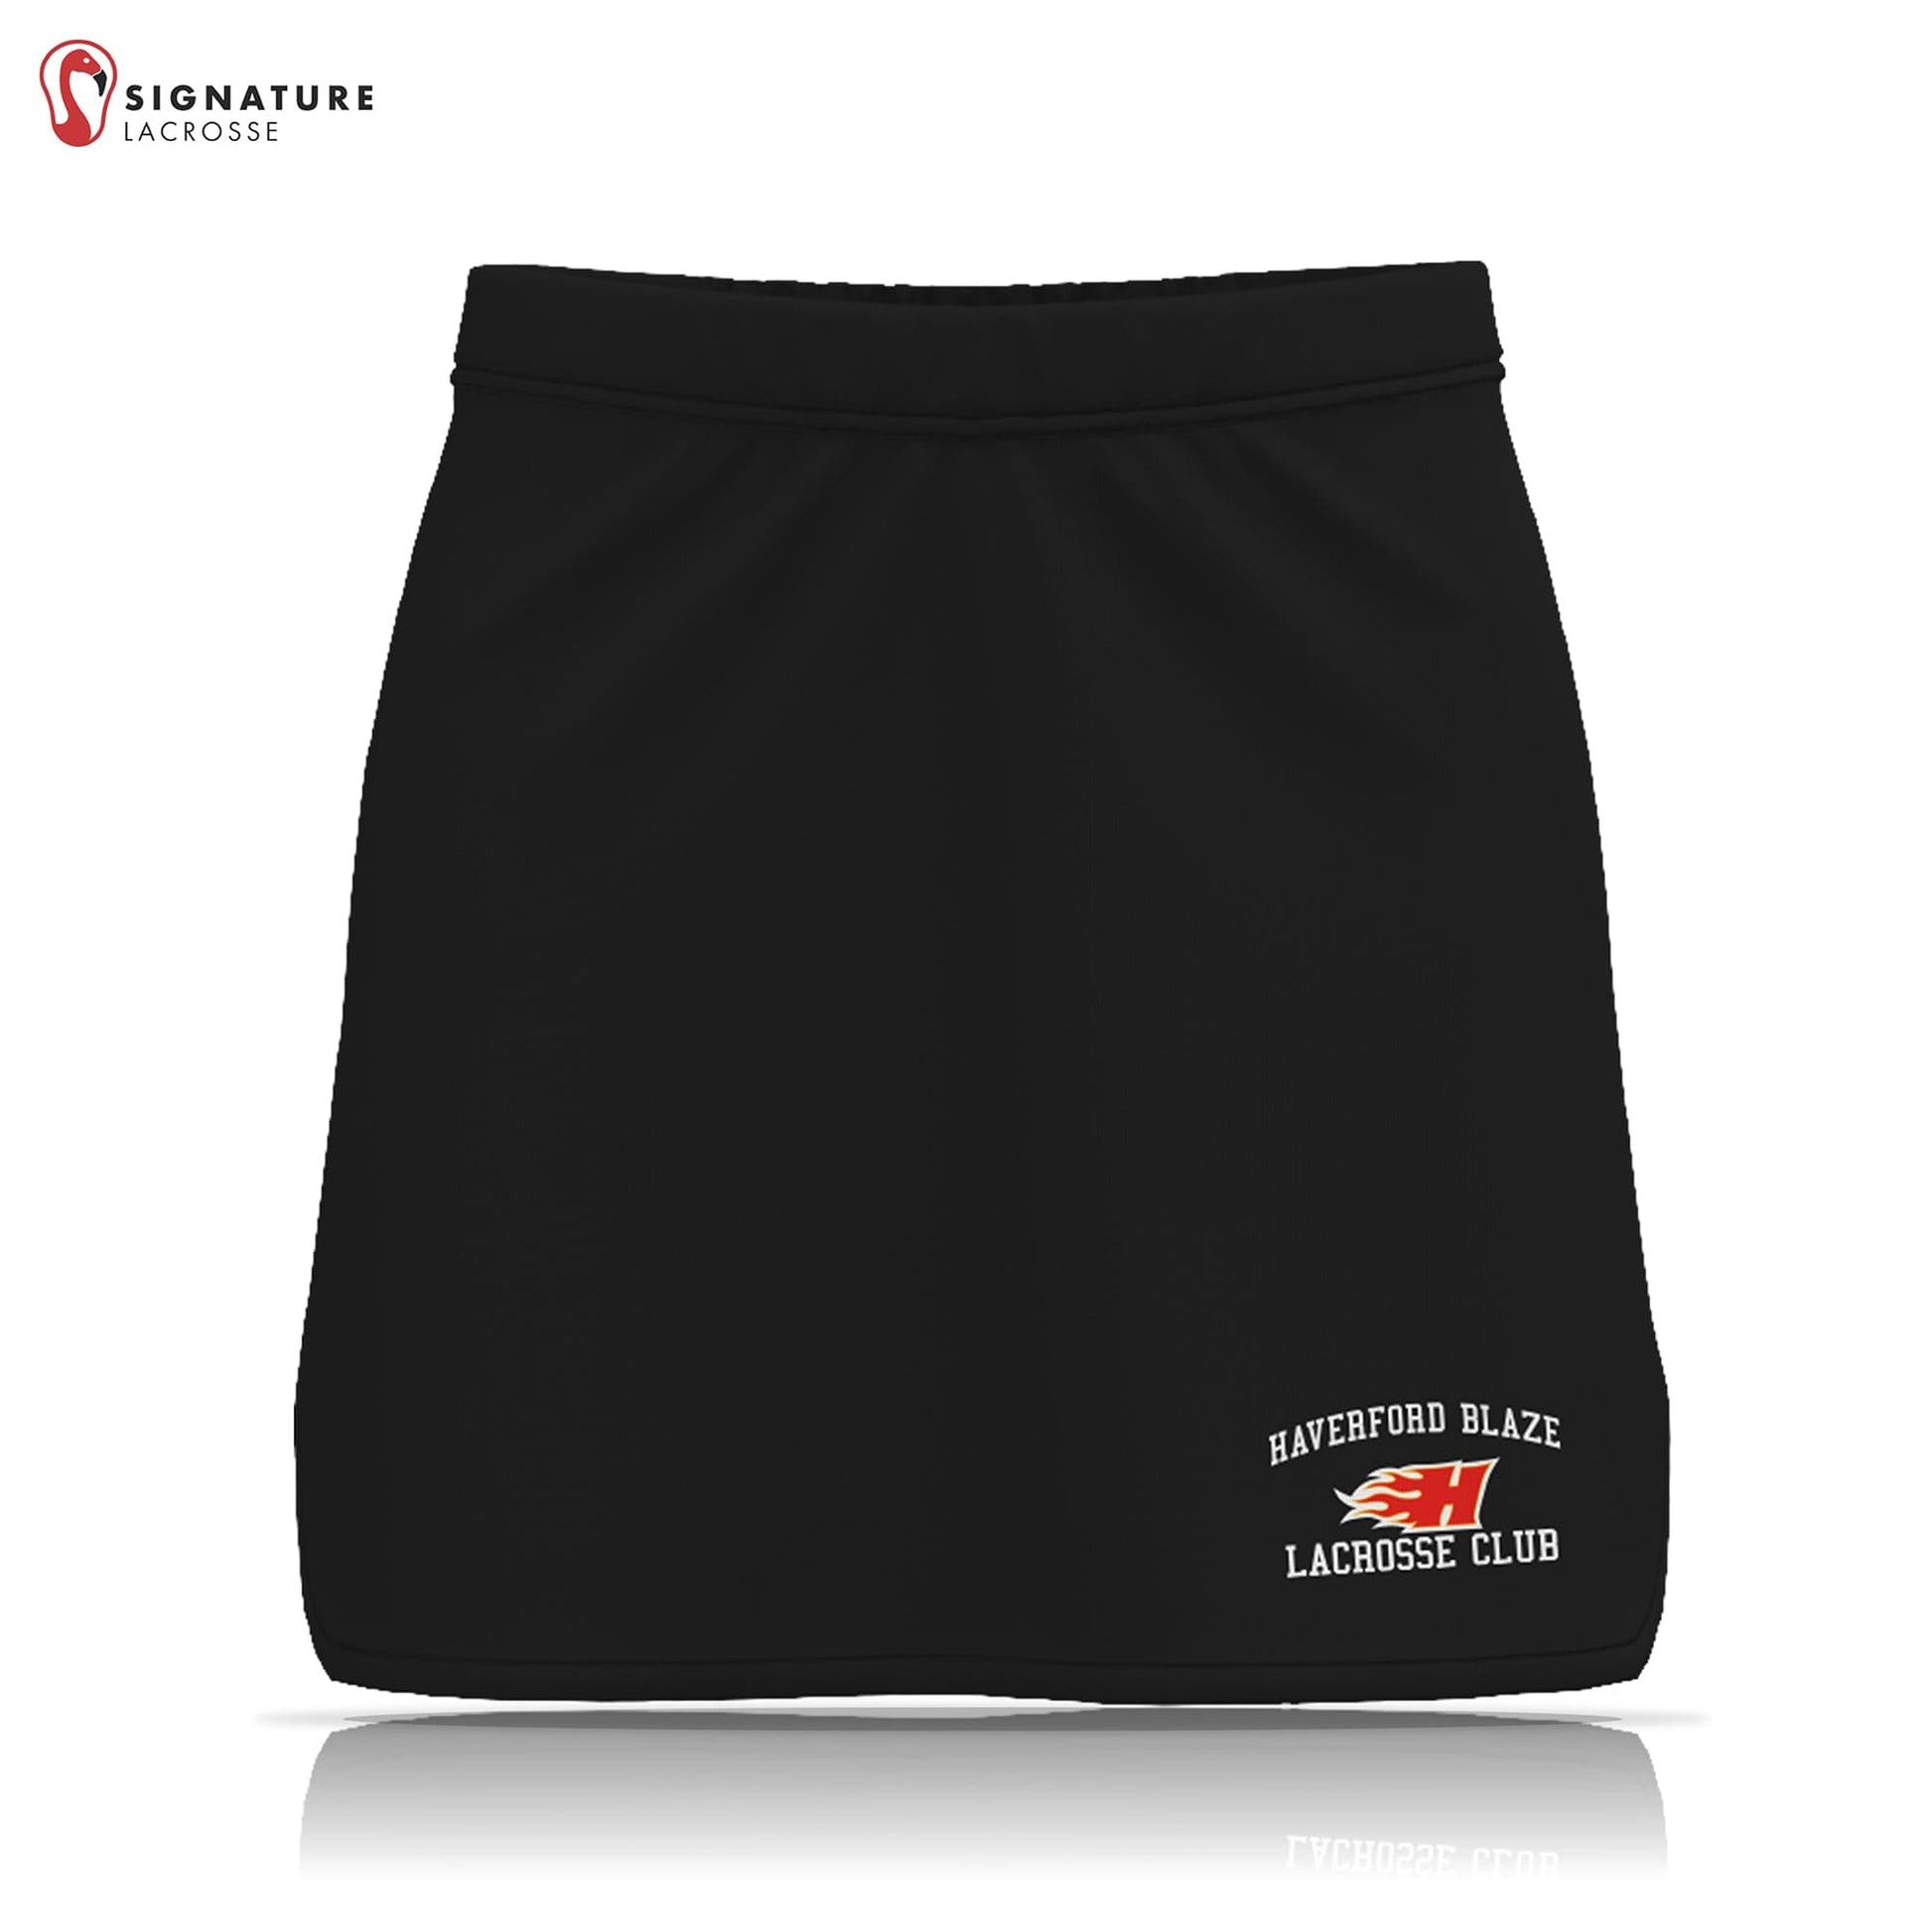 Haverford Blaze Lacrosse Women's Player Game Skirt: 7th/8th Grade Signature Lacrosse